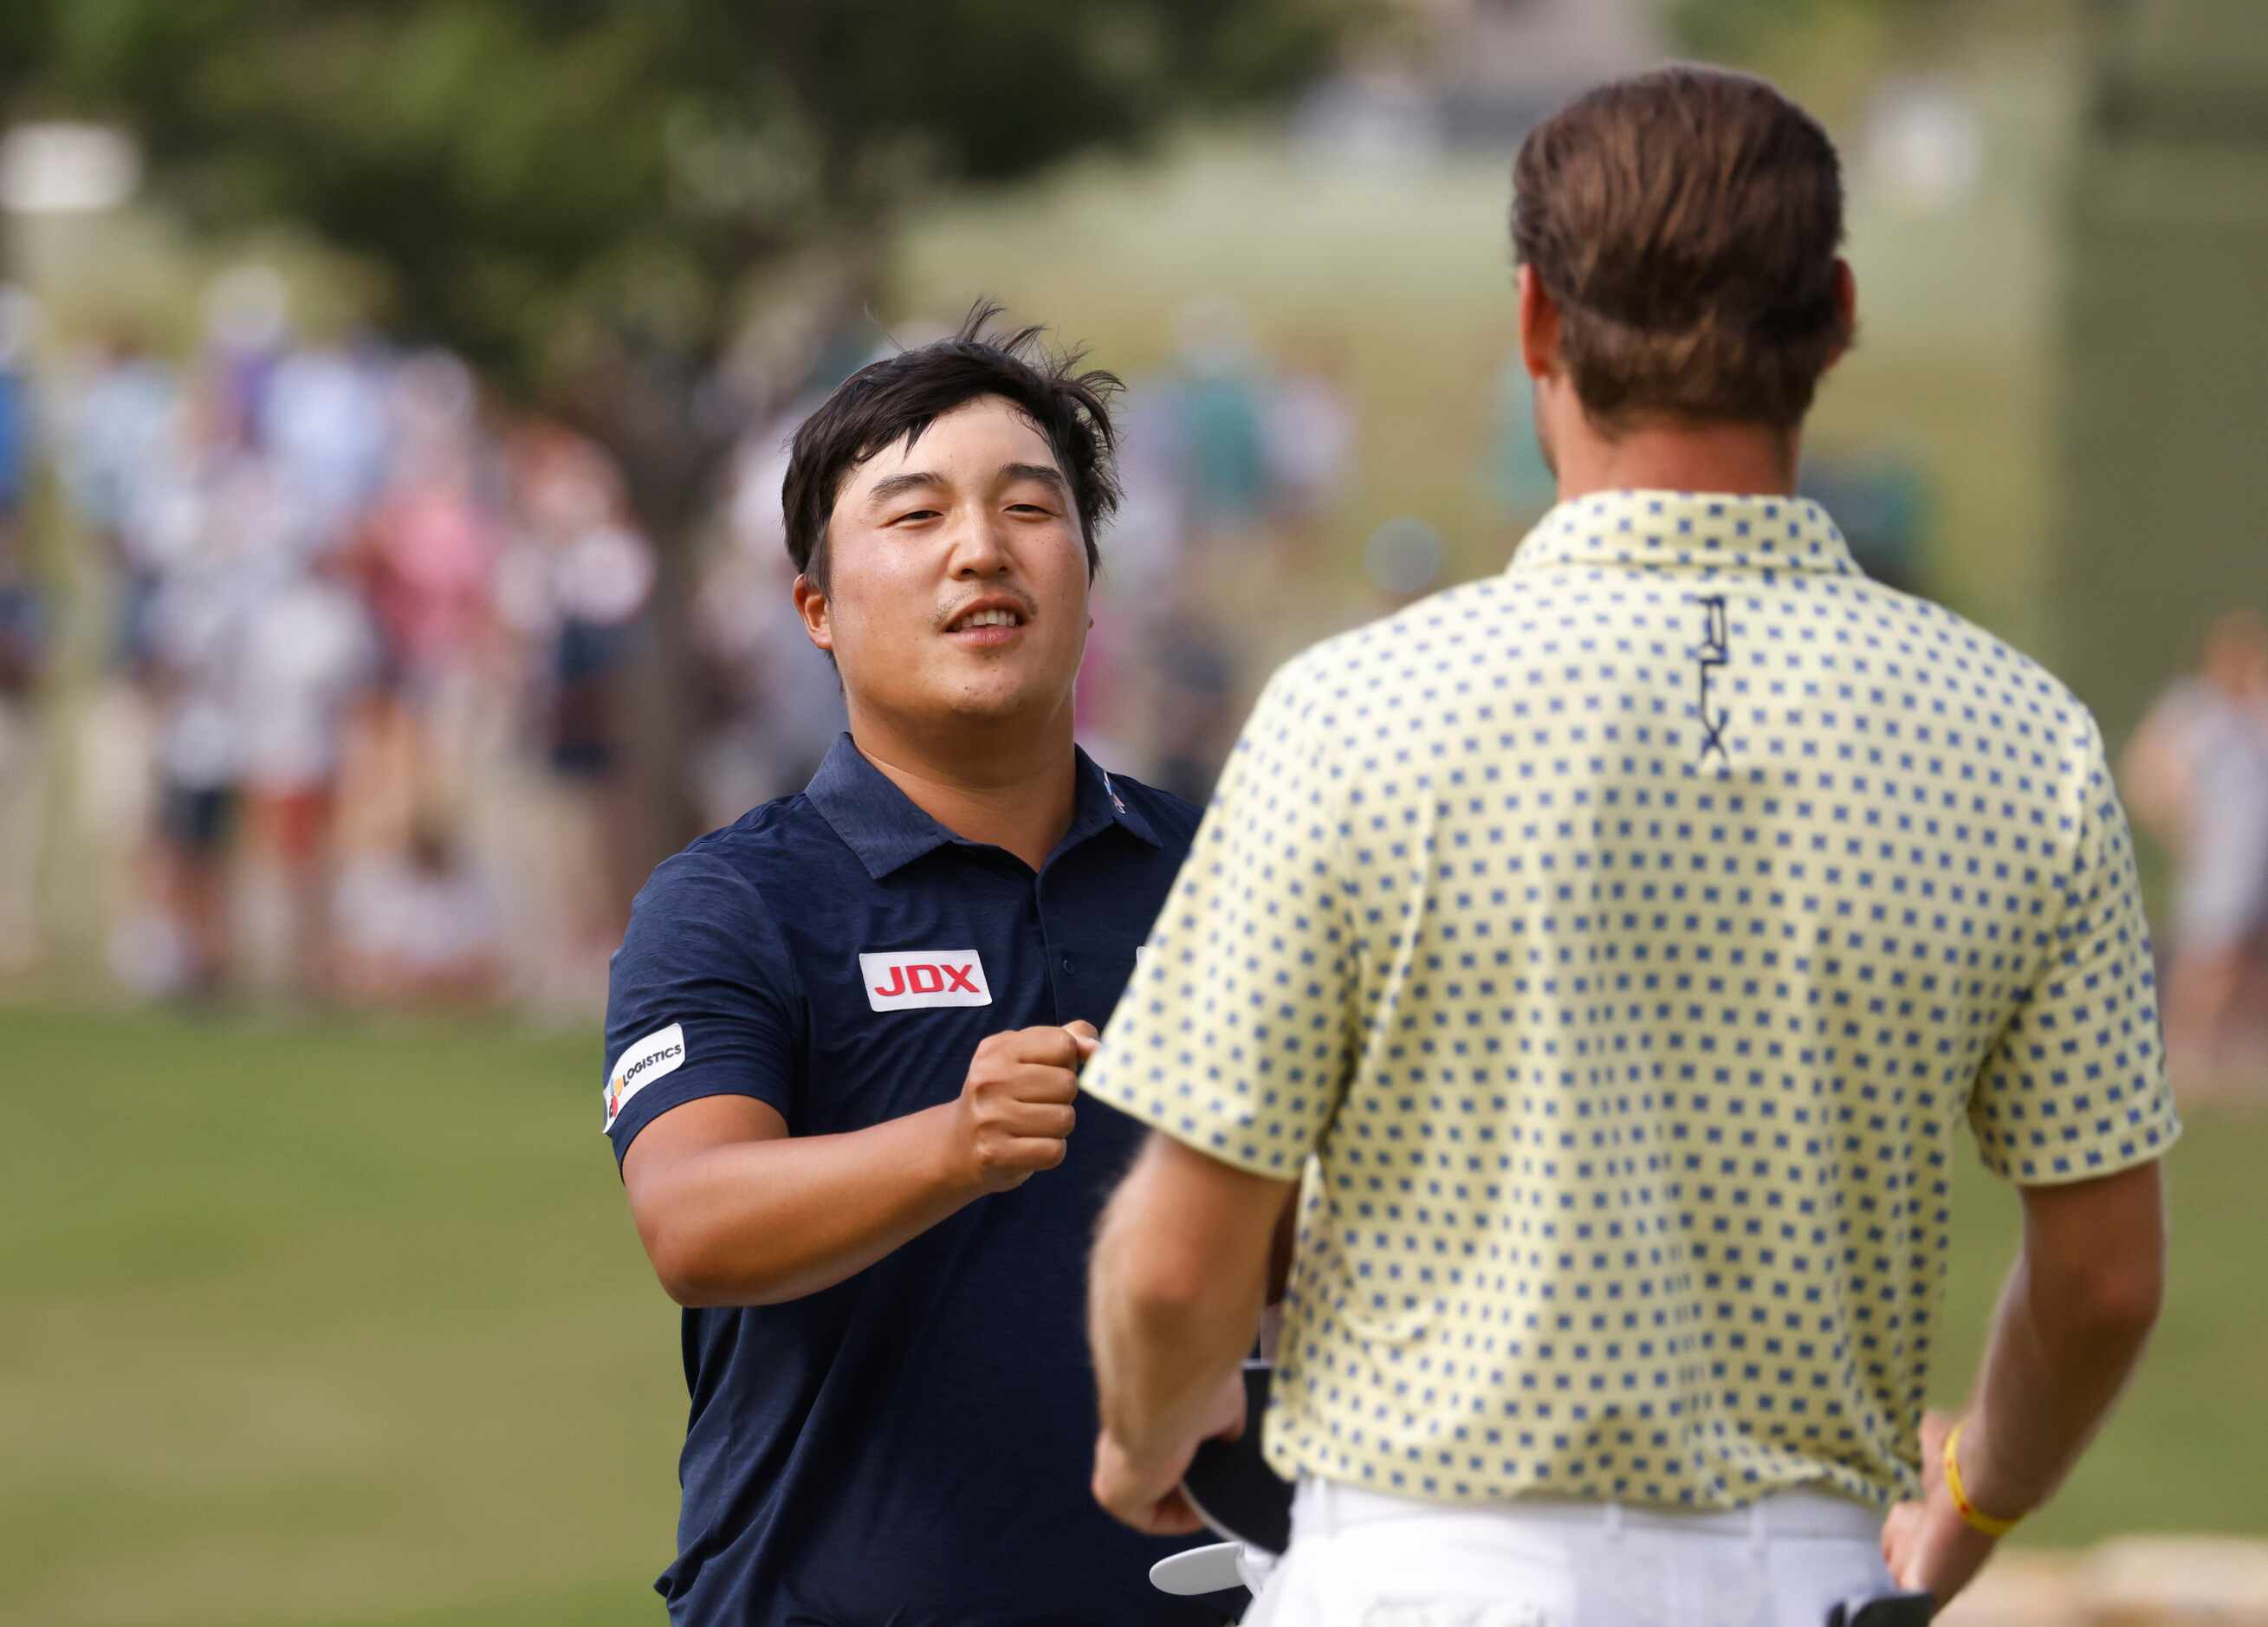 Kyoung-Hoon Lee bumps fists with Doc Redman after finishing on the 18th hole during round 3...